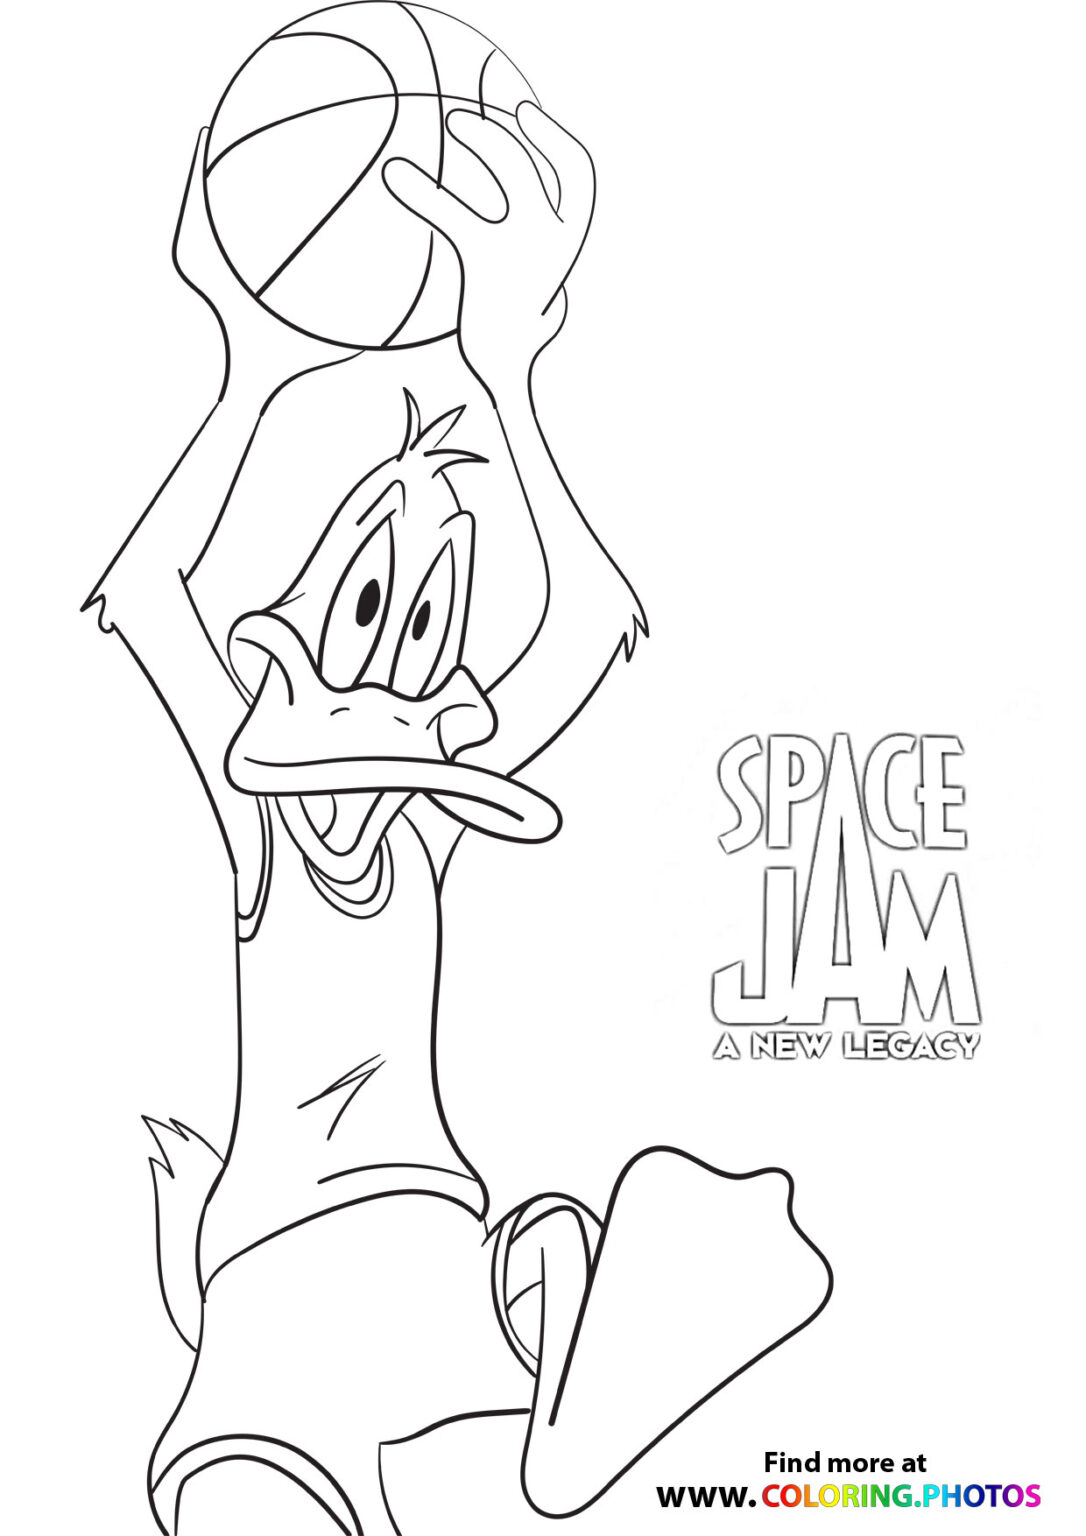 Space Jam 2: A new legacy Coloring Pages for kids Free coloring page